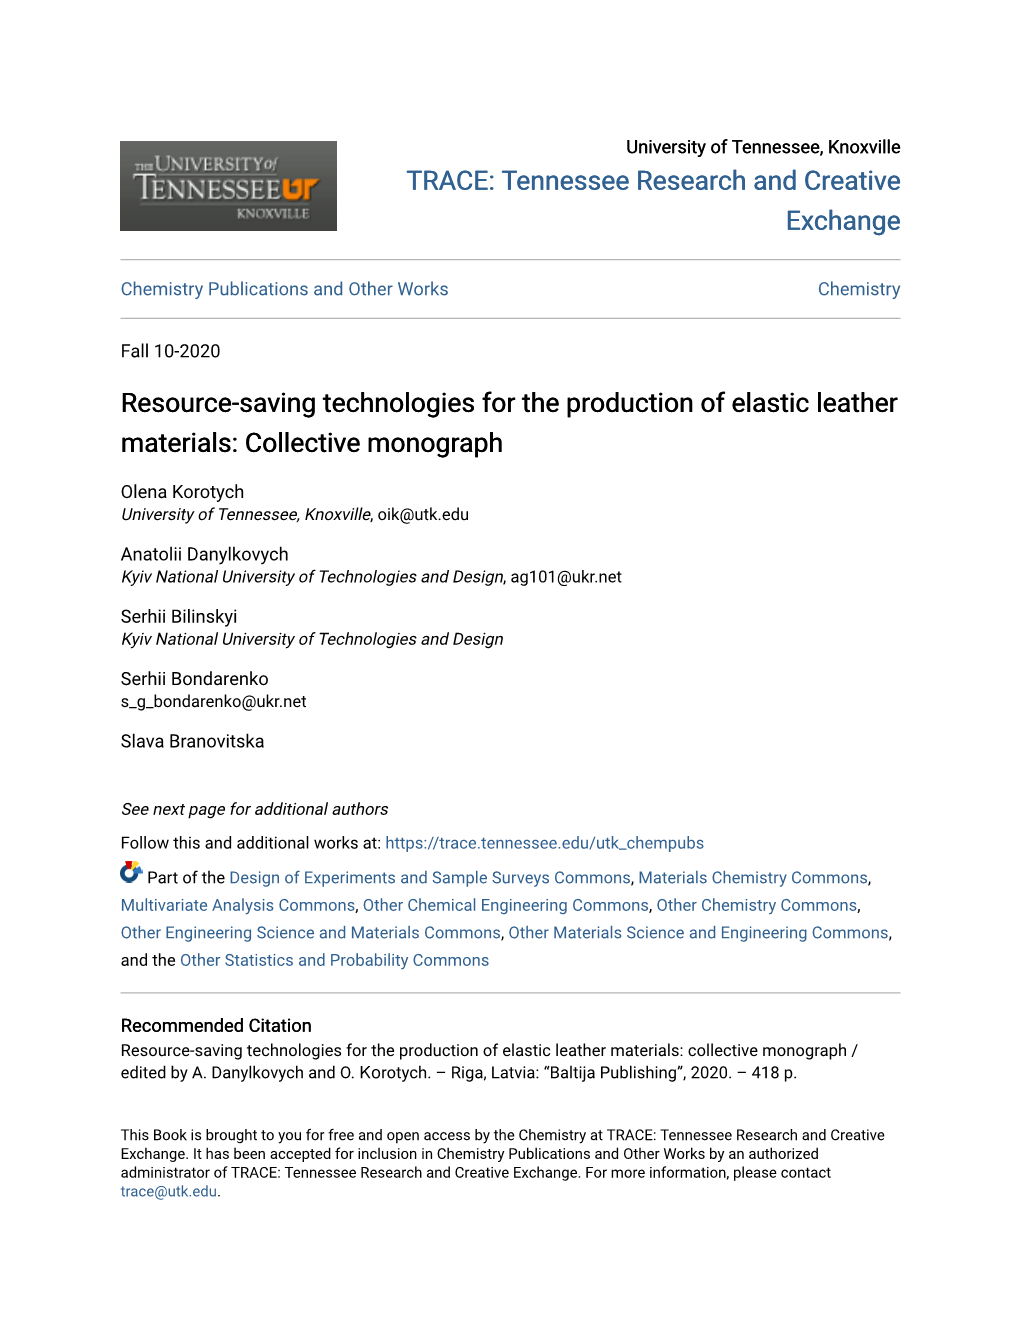 Resource-Saving Technologies for the Production of Elastic Leather Materials: Collective Monograph